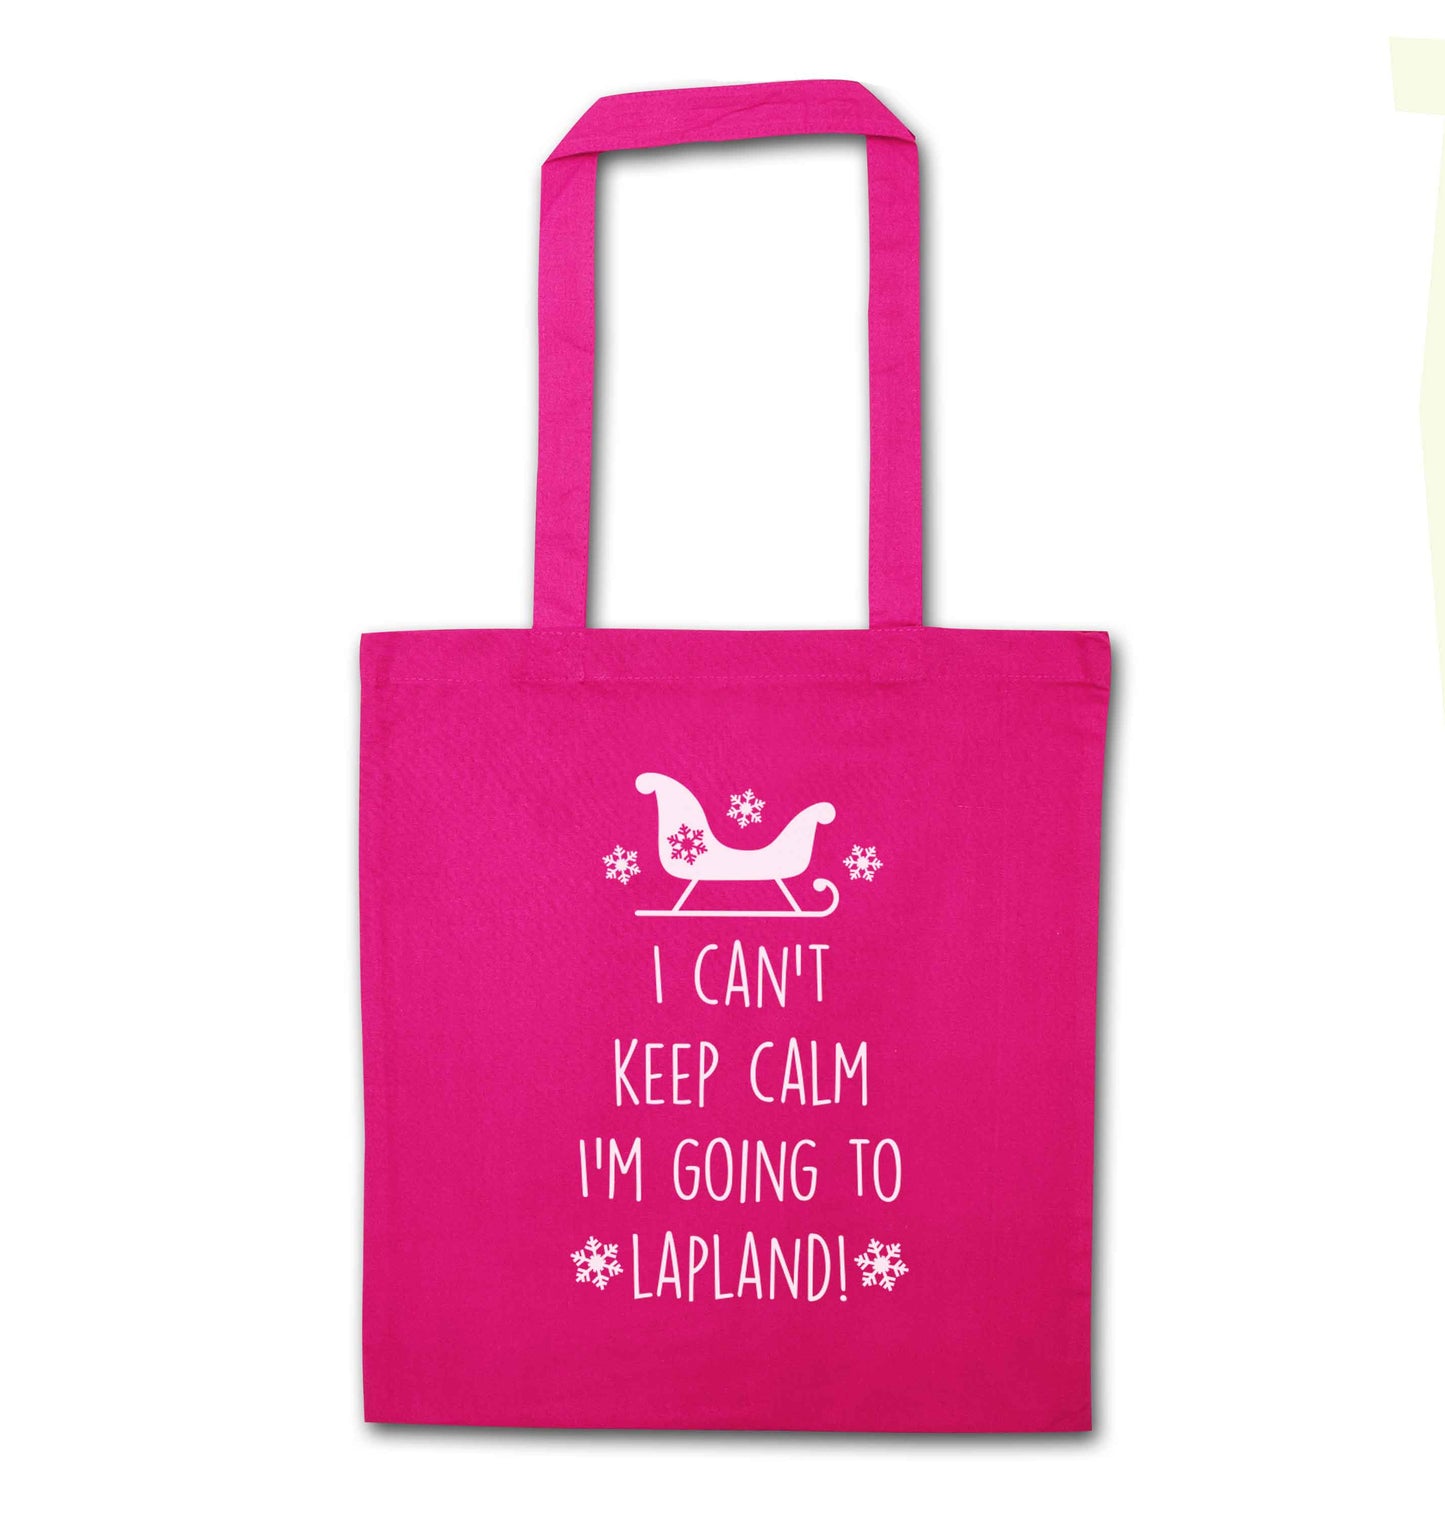 I can't keep calm I'm going to Lapland pink tote bag